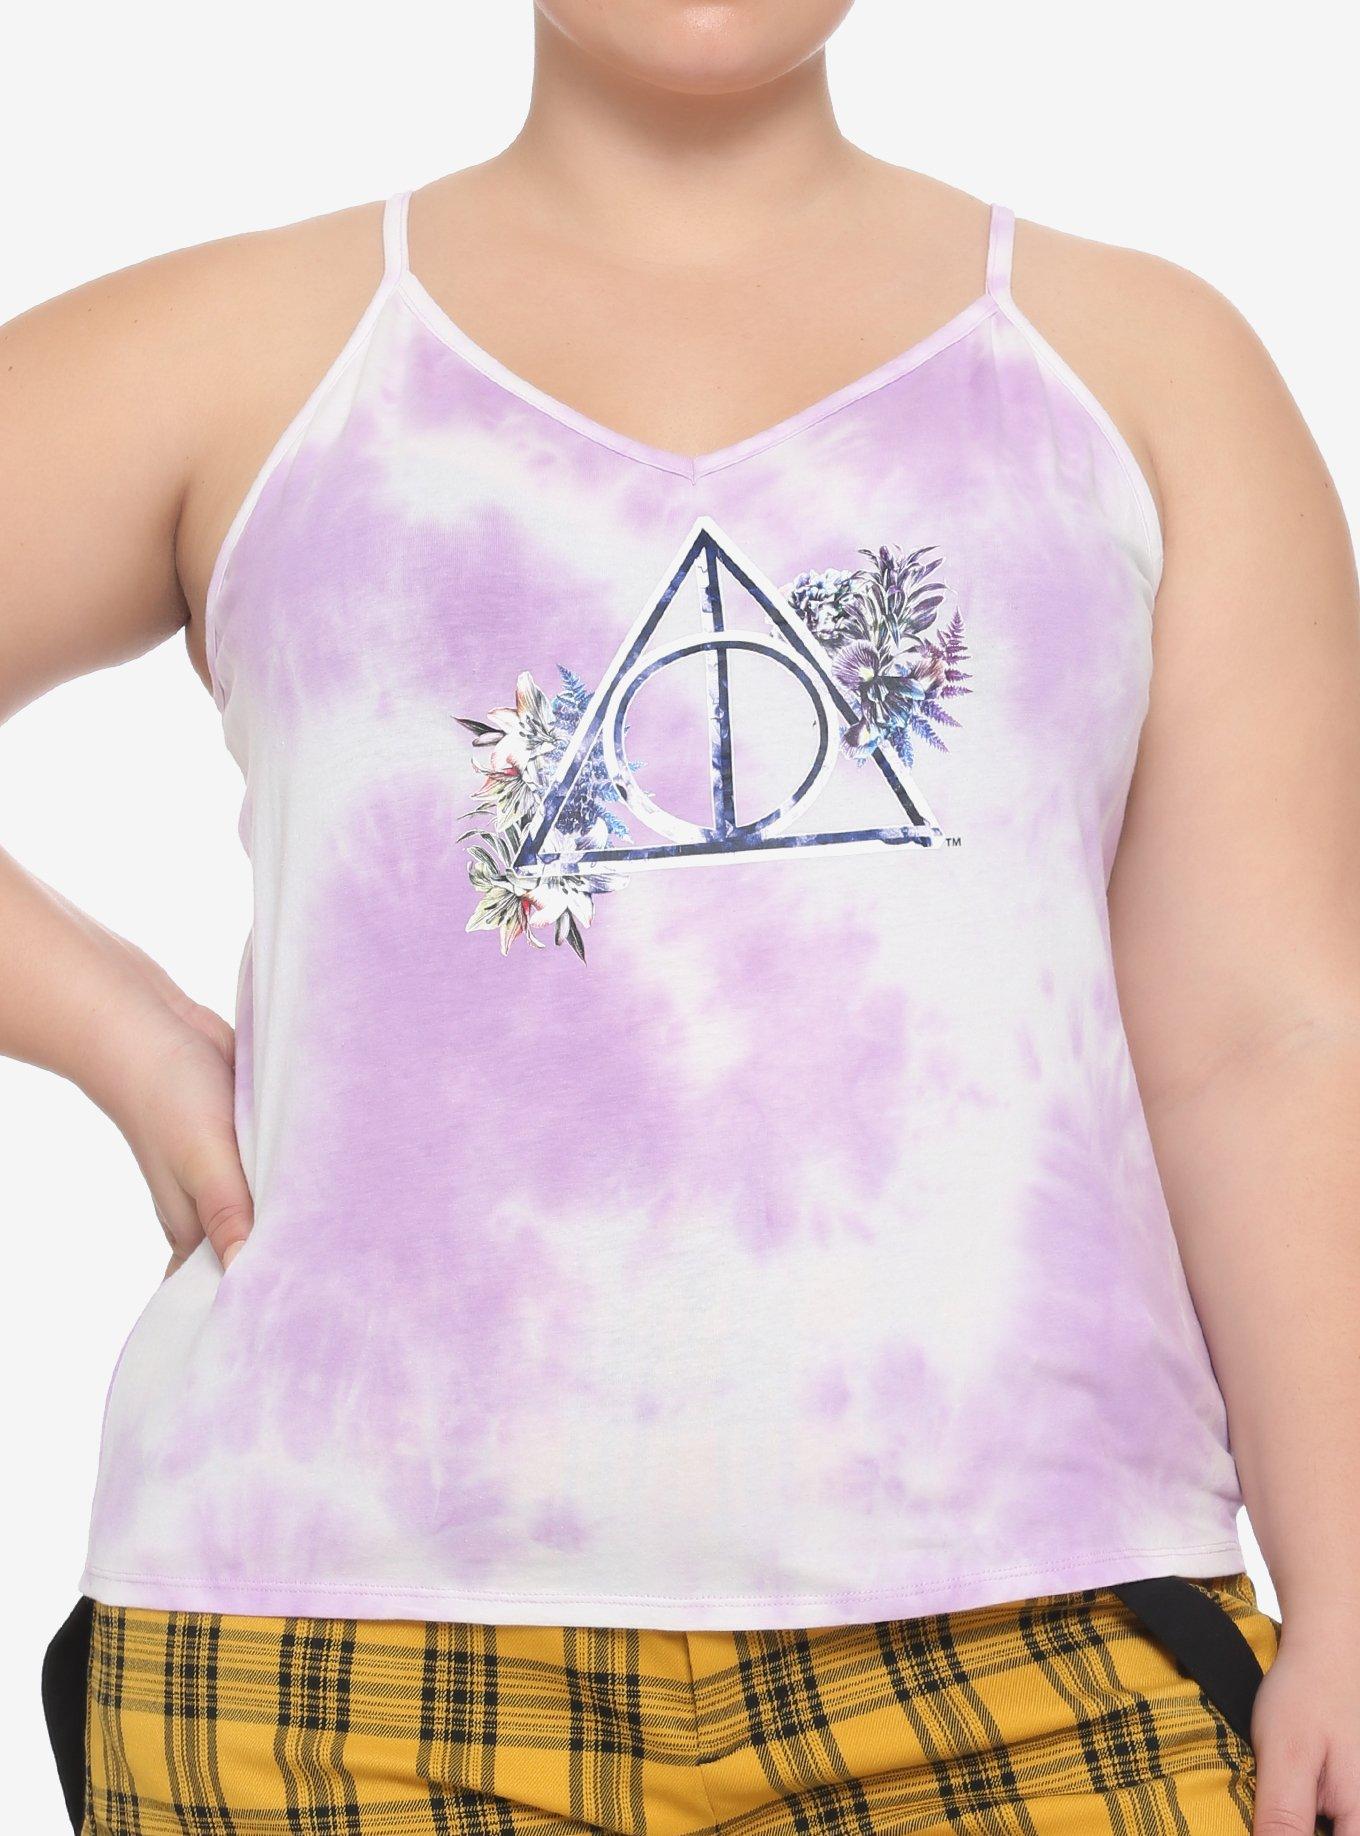 Harry Potter Deathly Hallows Floral Tie-Dye Girls Strappy Tank Top Plus Size, MULTI, hi-res